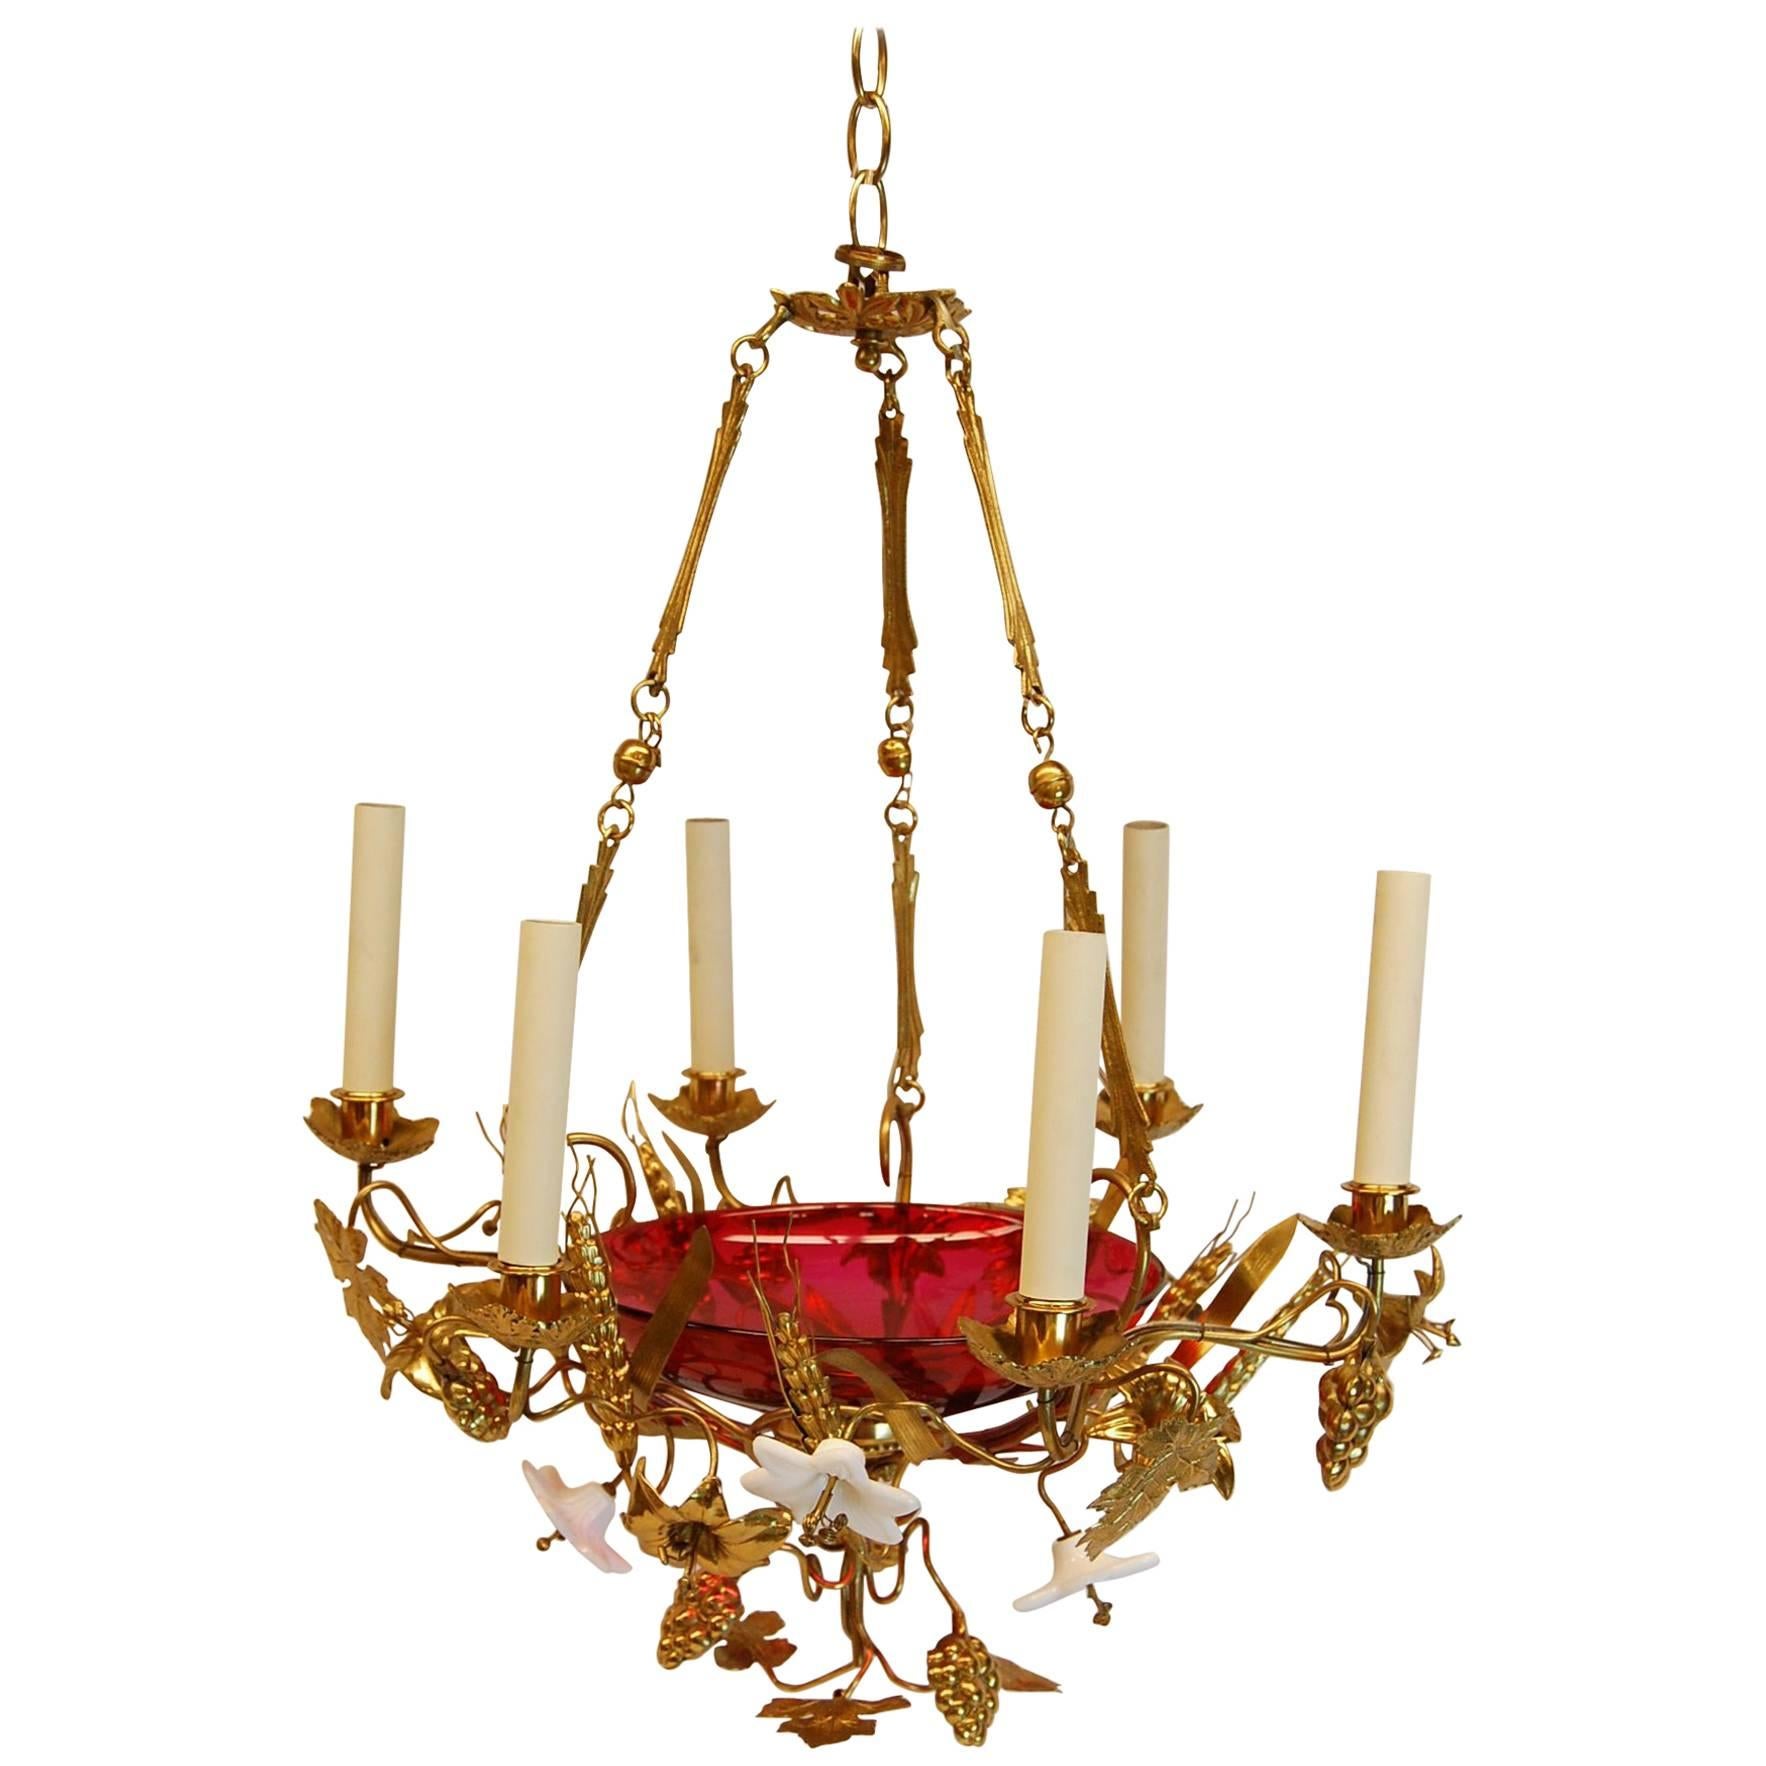 French Chandelier w/ Glass Lilies & Stamped Brass Decorations, Mid 19th Century For Sale